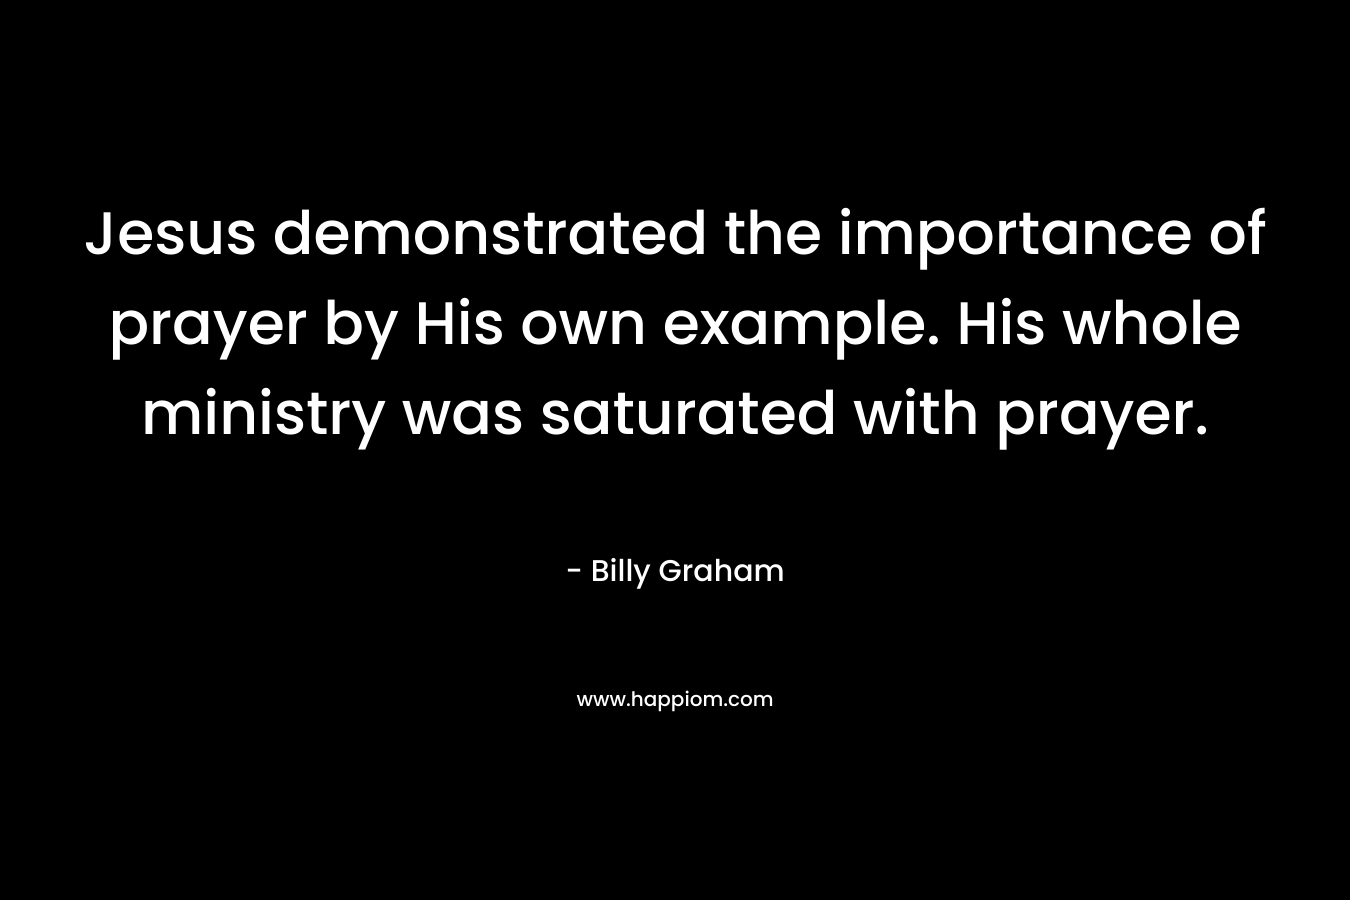 Jesus demonstrated the importance of prayer by His own example. His whole ministry was saturated with prayer.